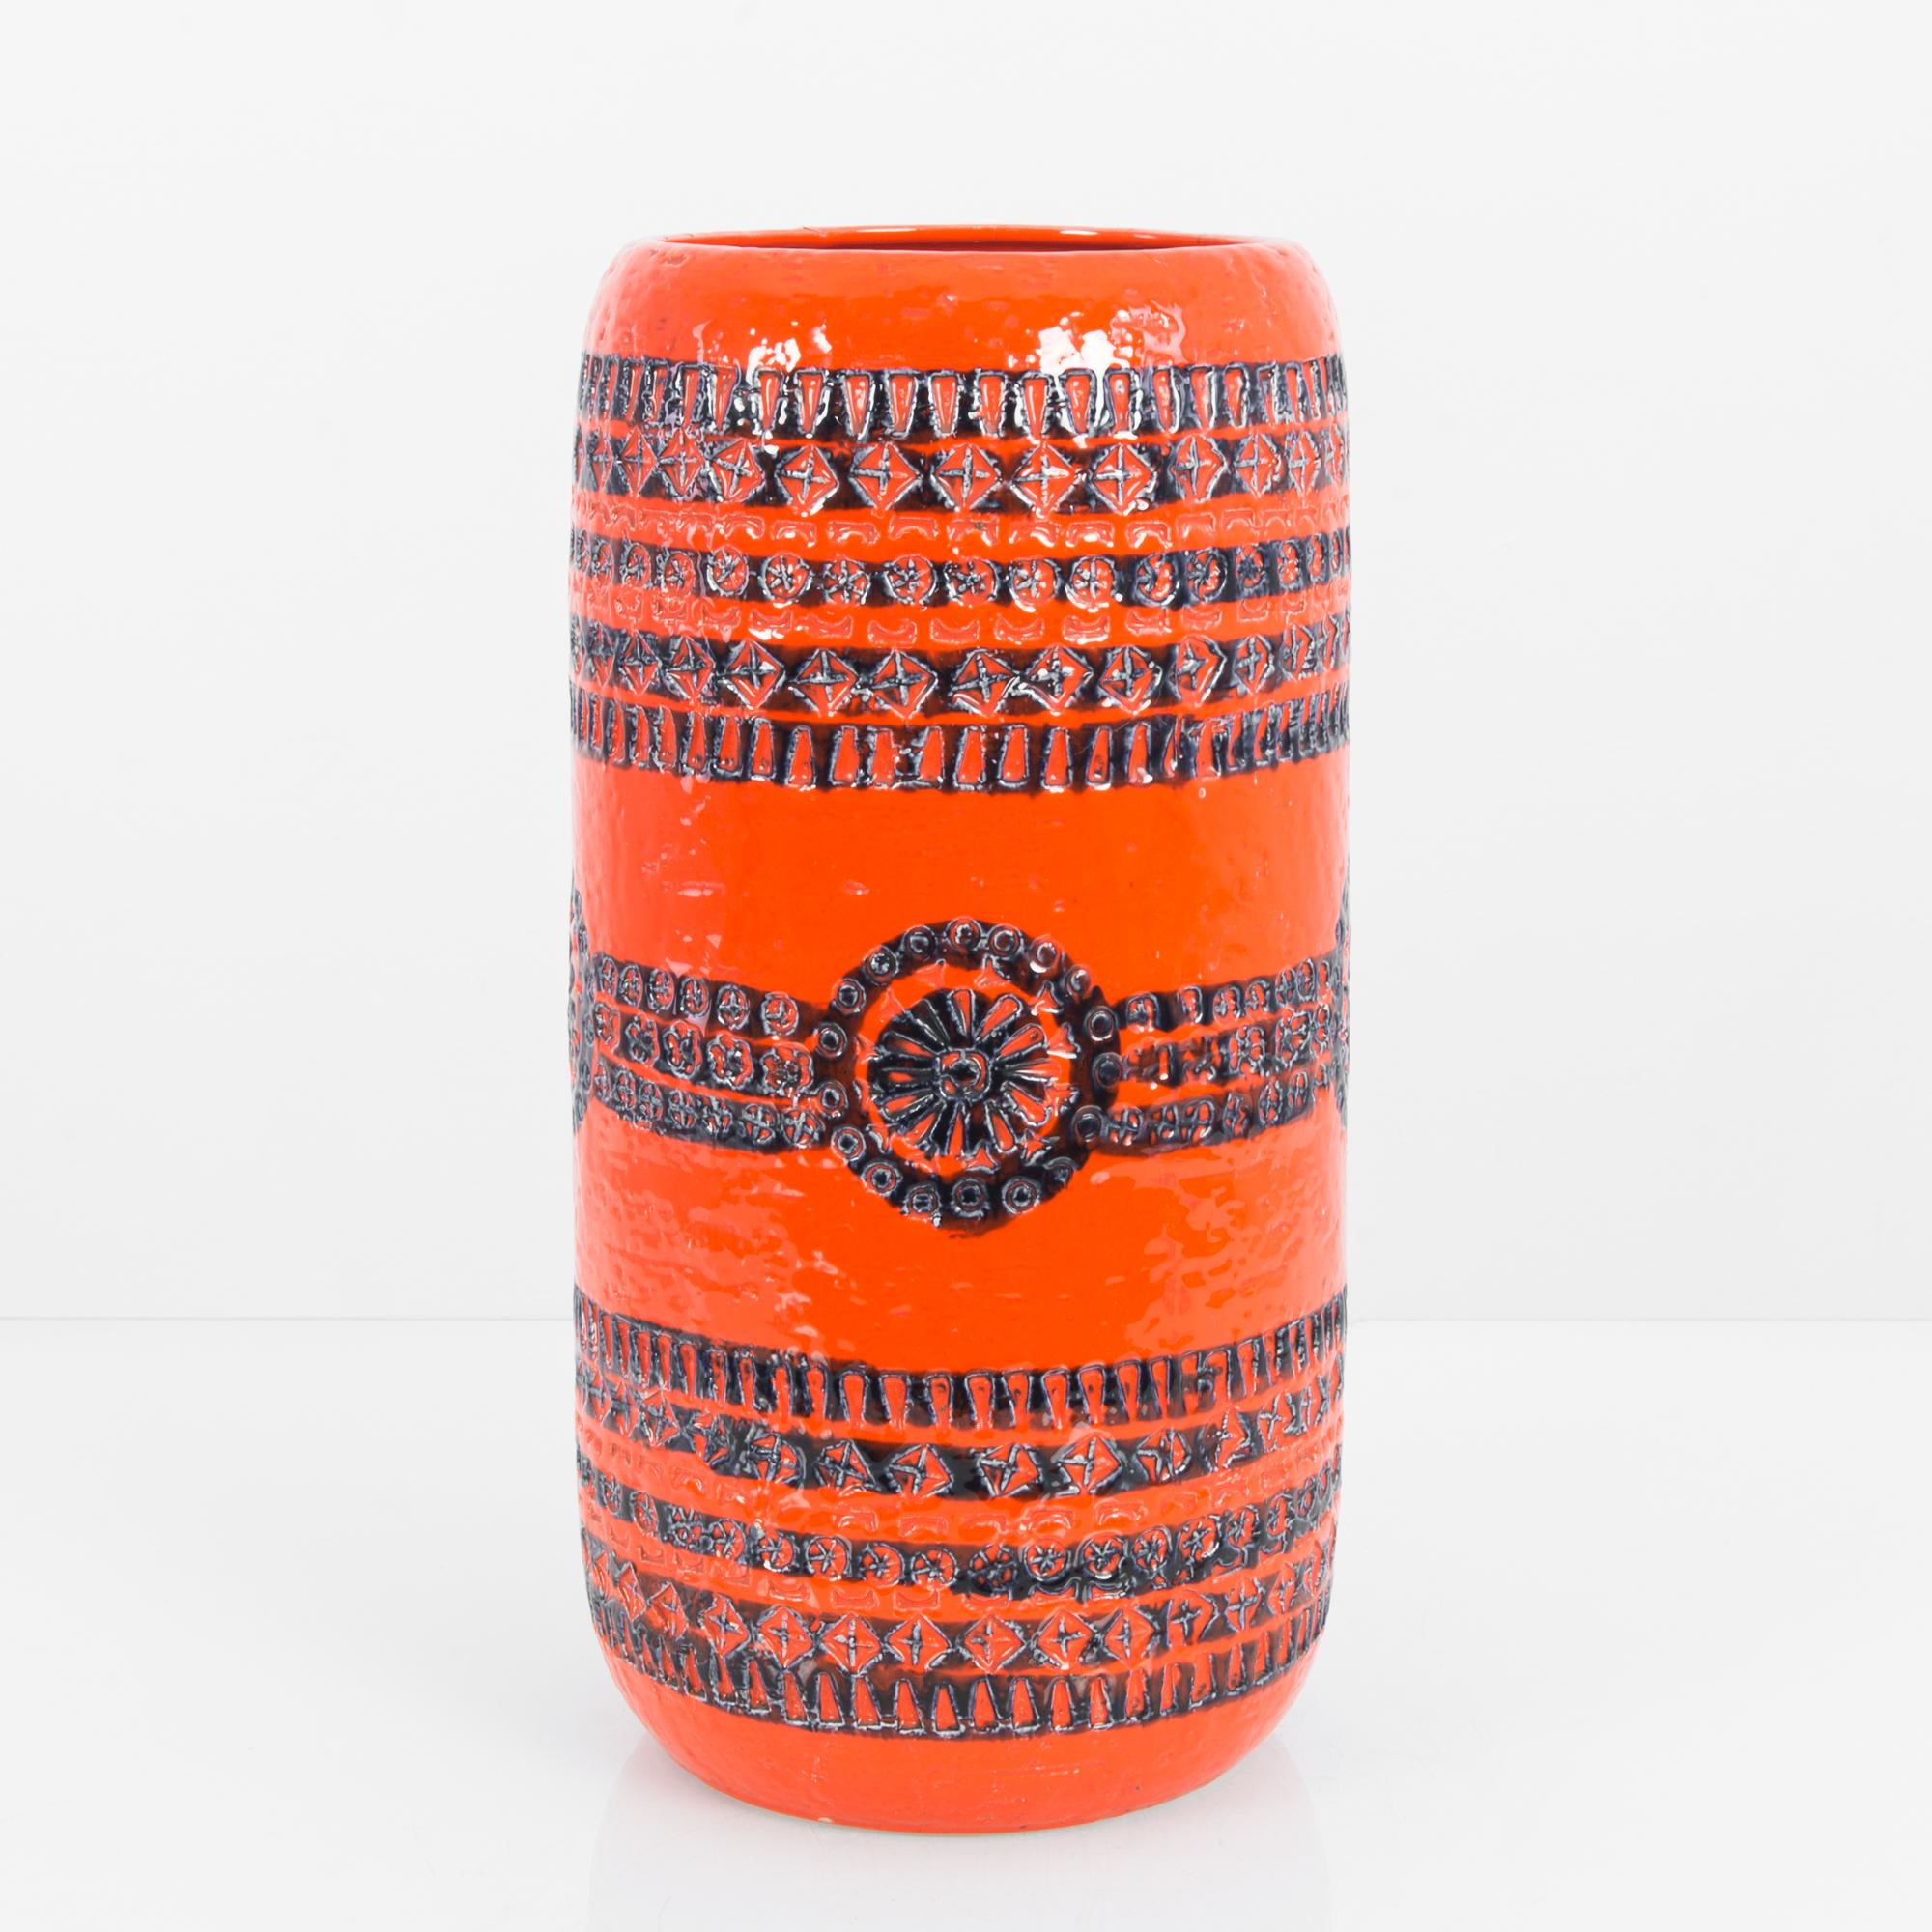 This ceramic vase was made in Germany, circa 1960 and is an eye-catching example of the simple form and decorative nature of West German Art Pottery after the Second World War. This vase’s cylindrical form is glazed with a vivid, deep orange shade.